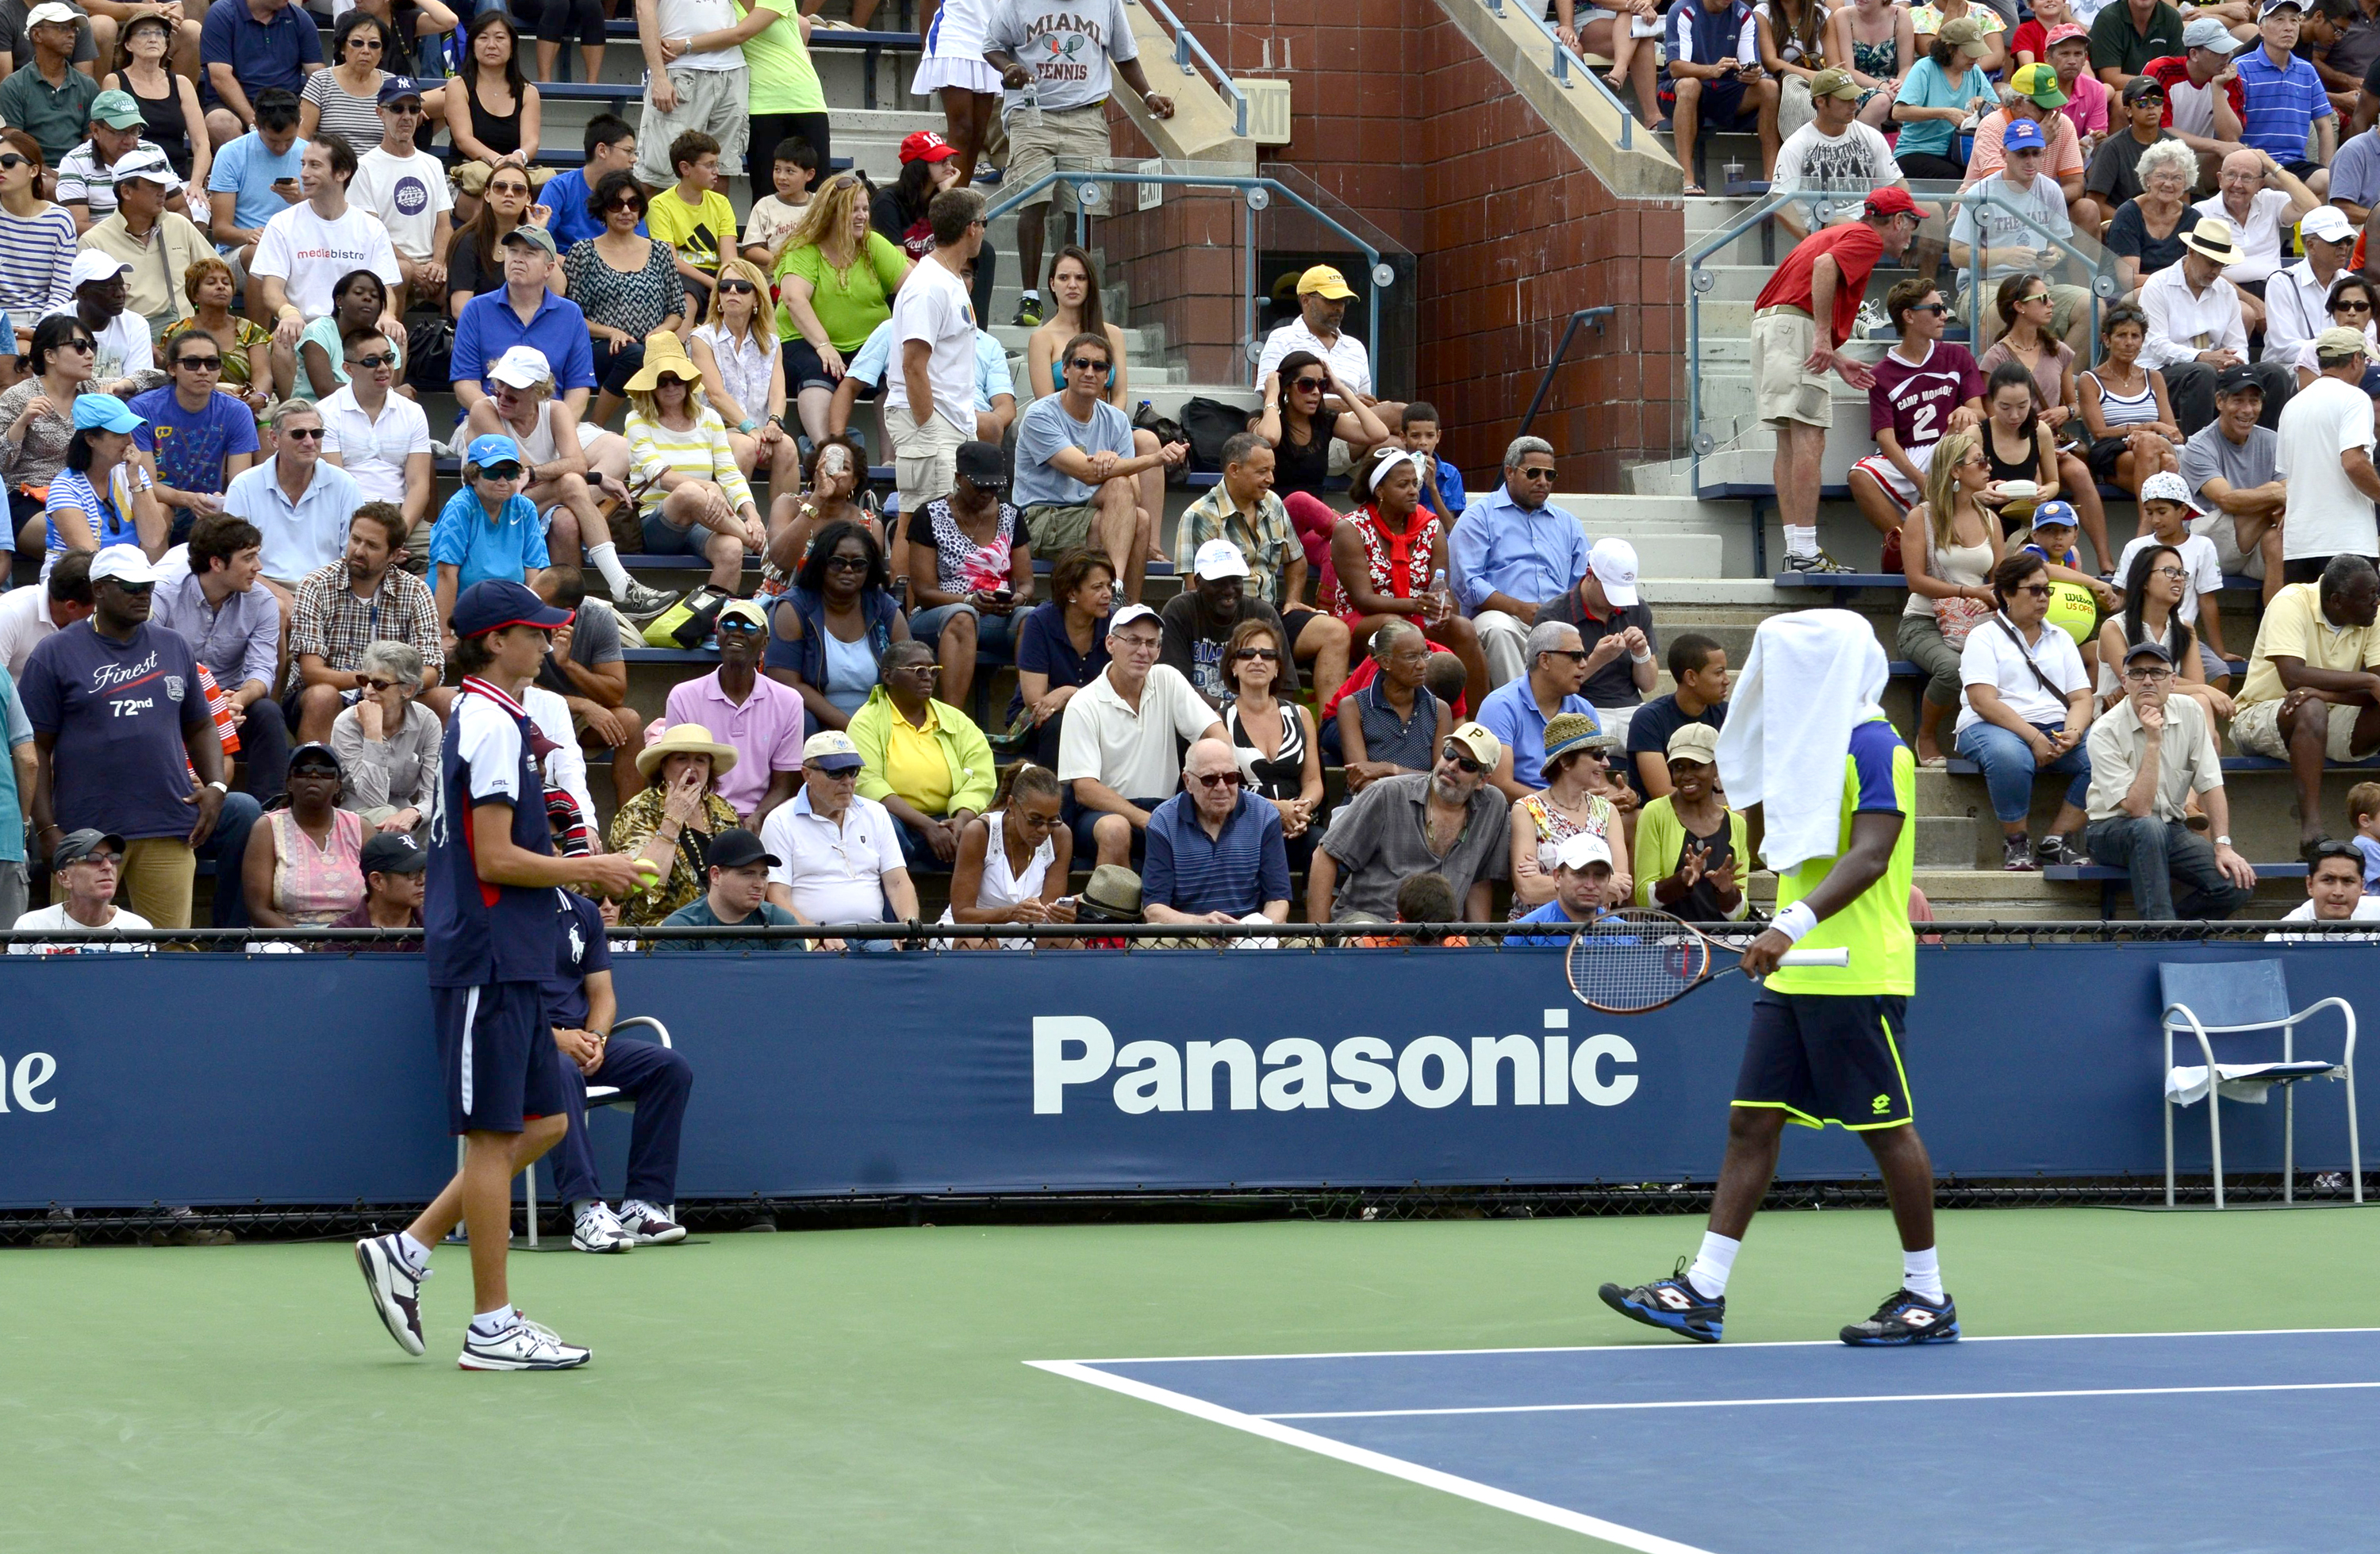 File:2013 US Open (Tennis) - Qualifying Round (9737241377).jpg - Wikimedia Commons